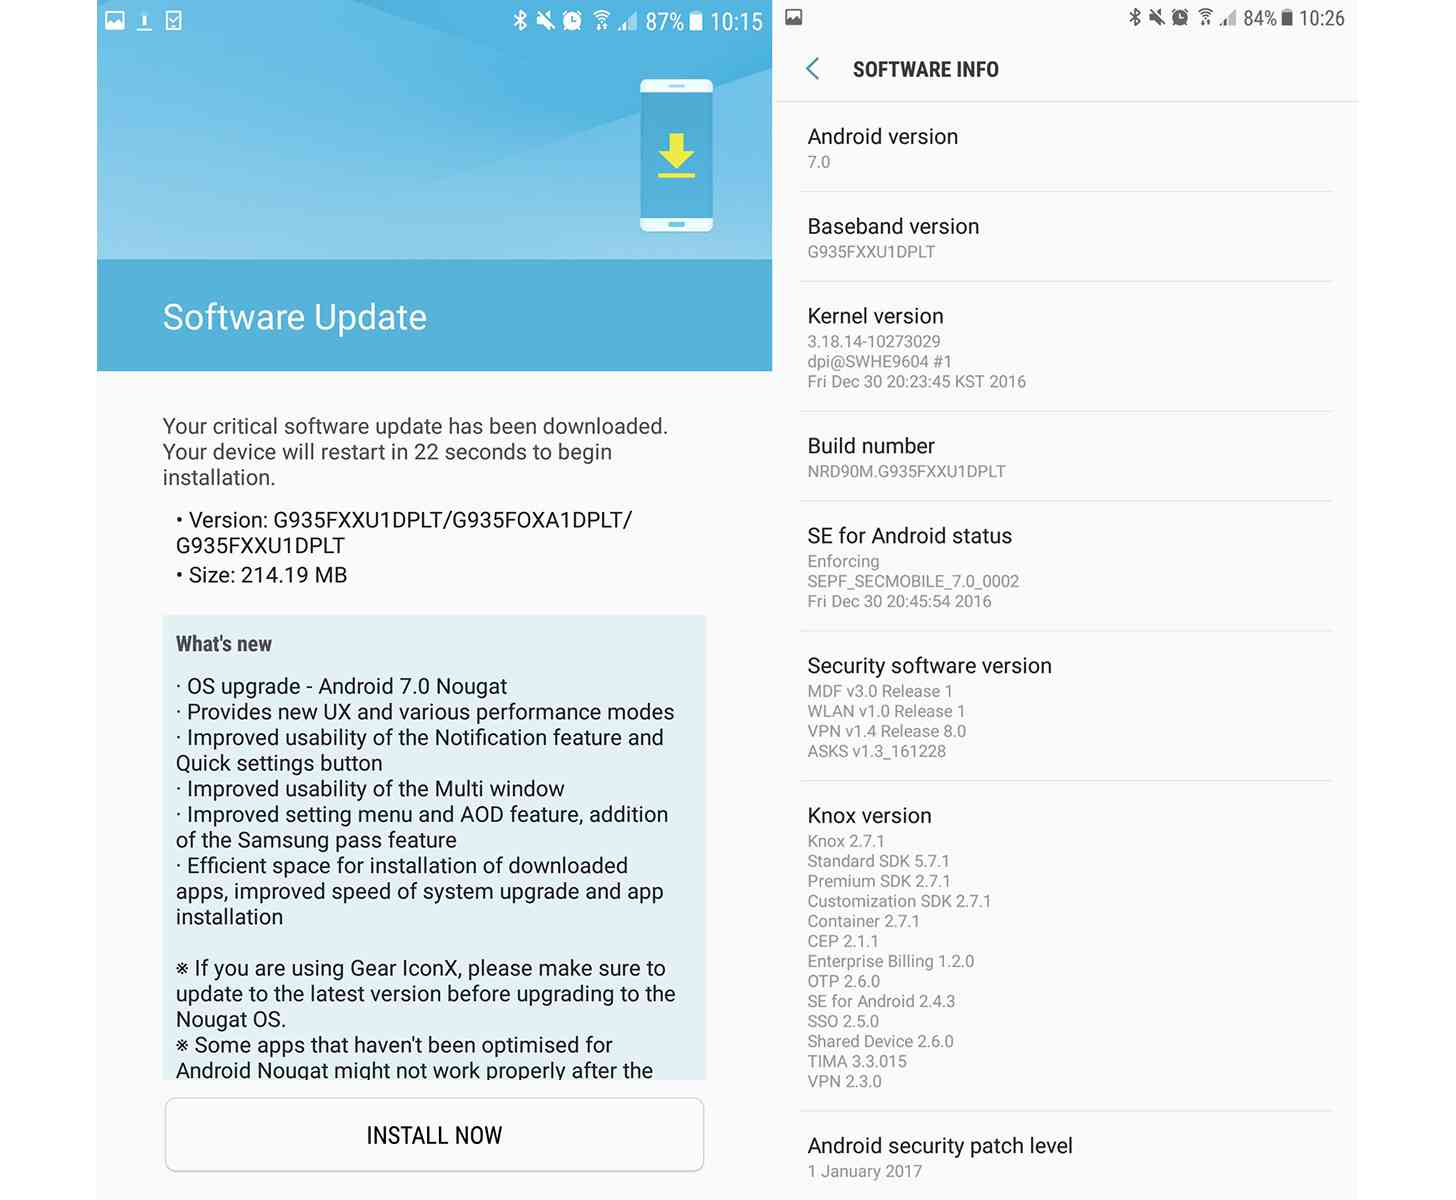 Samsung Galaxy S7 edge Android 7.0 Nougat update